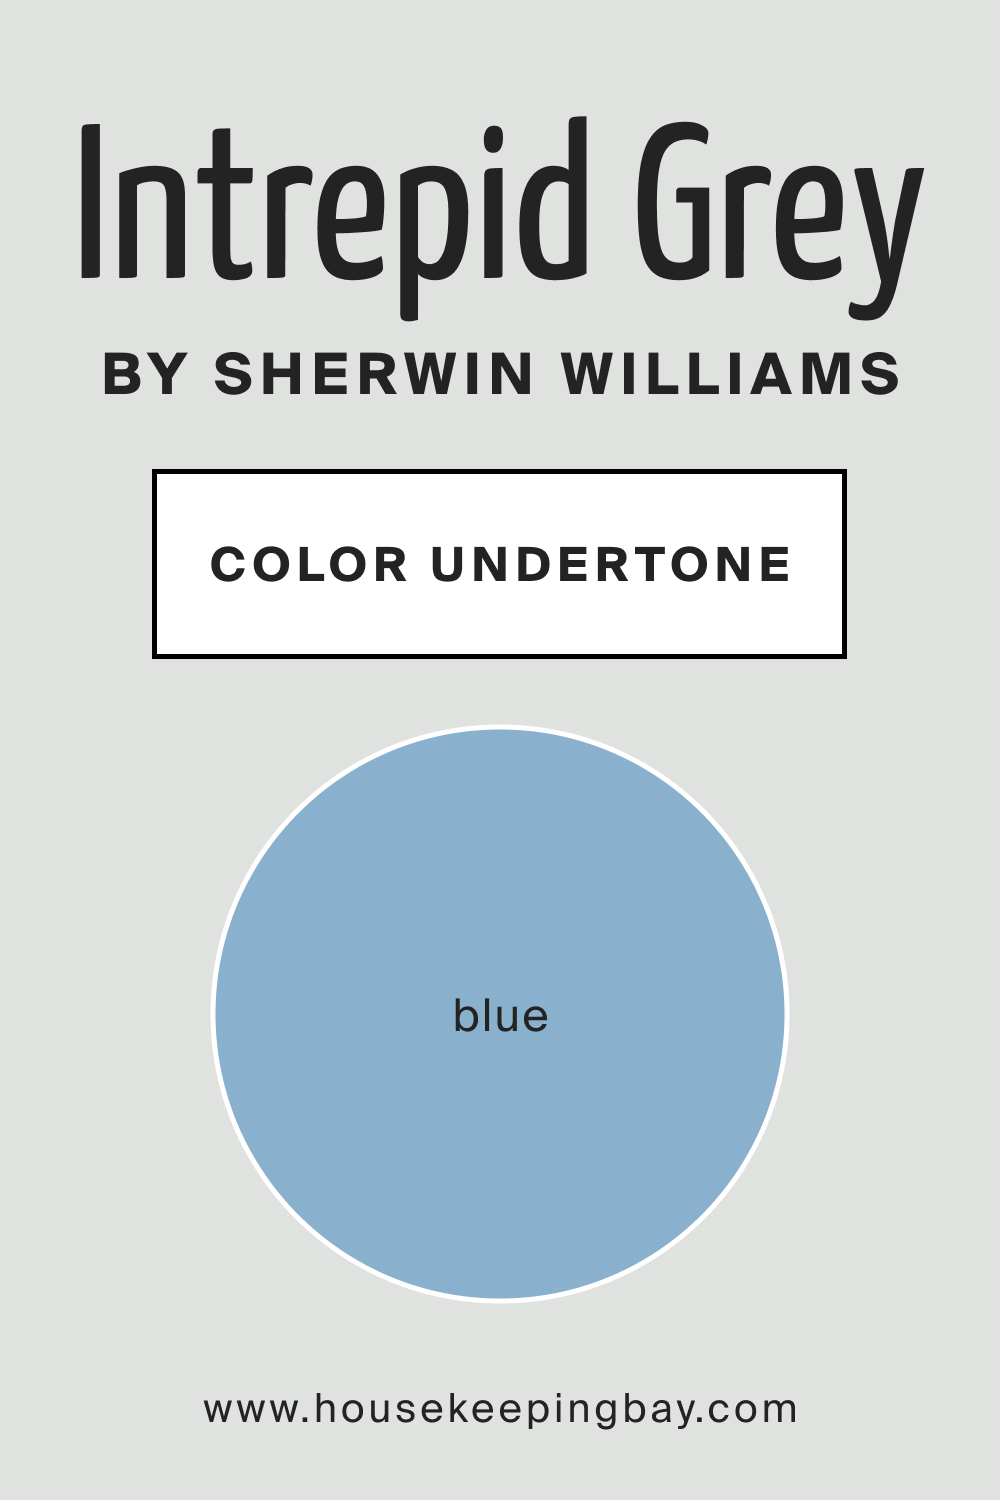 SW 9556 Intrepid Grey by Sherwin Williams Color Undertone